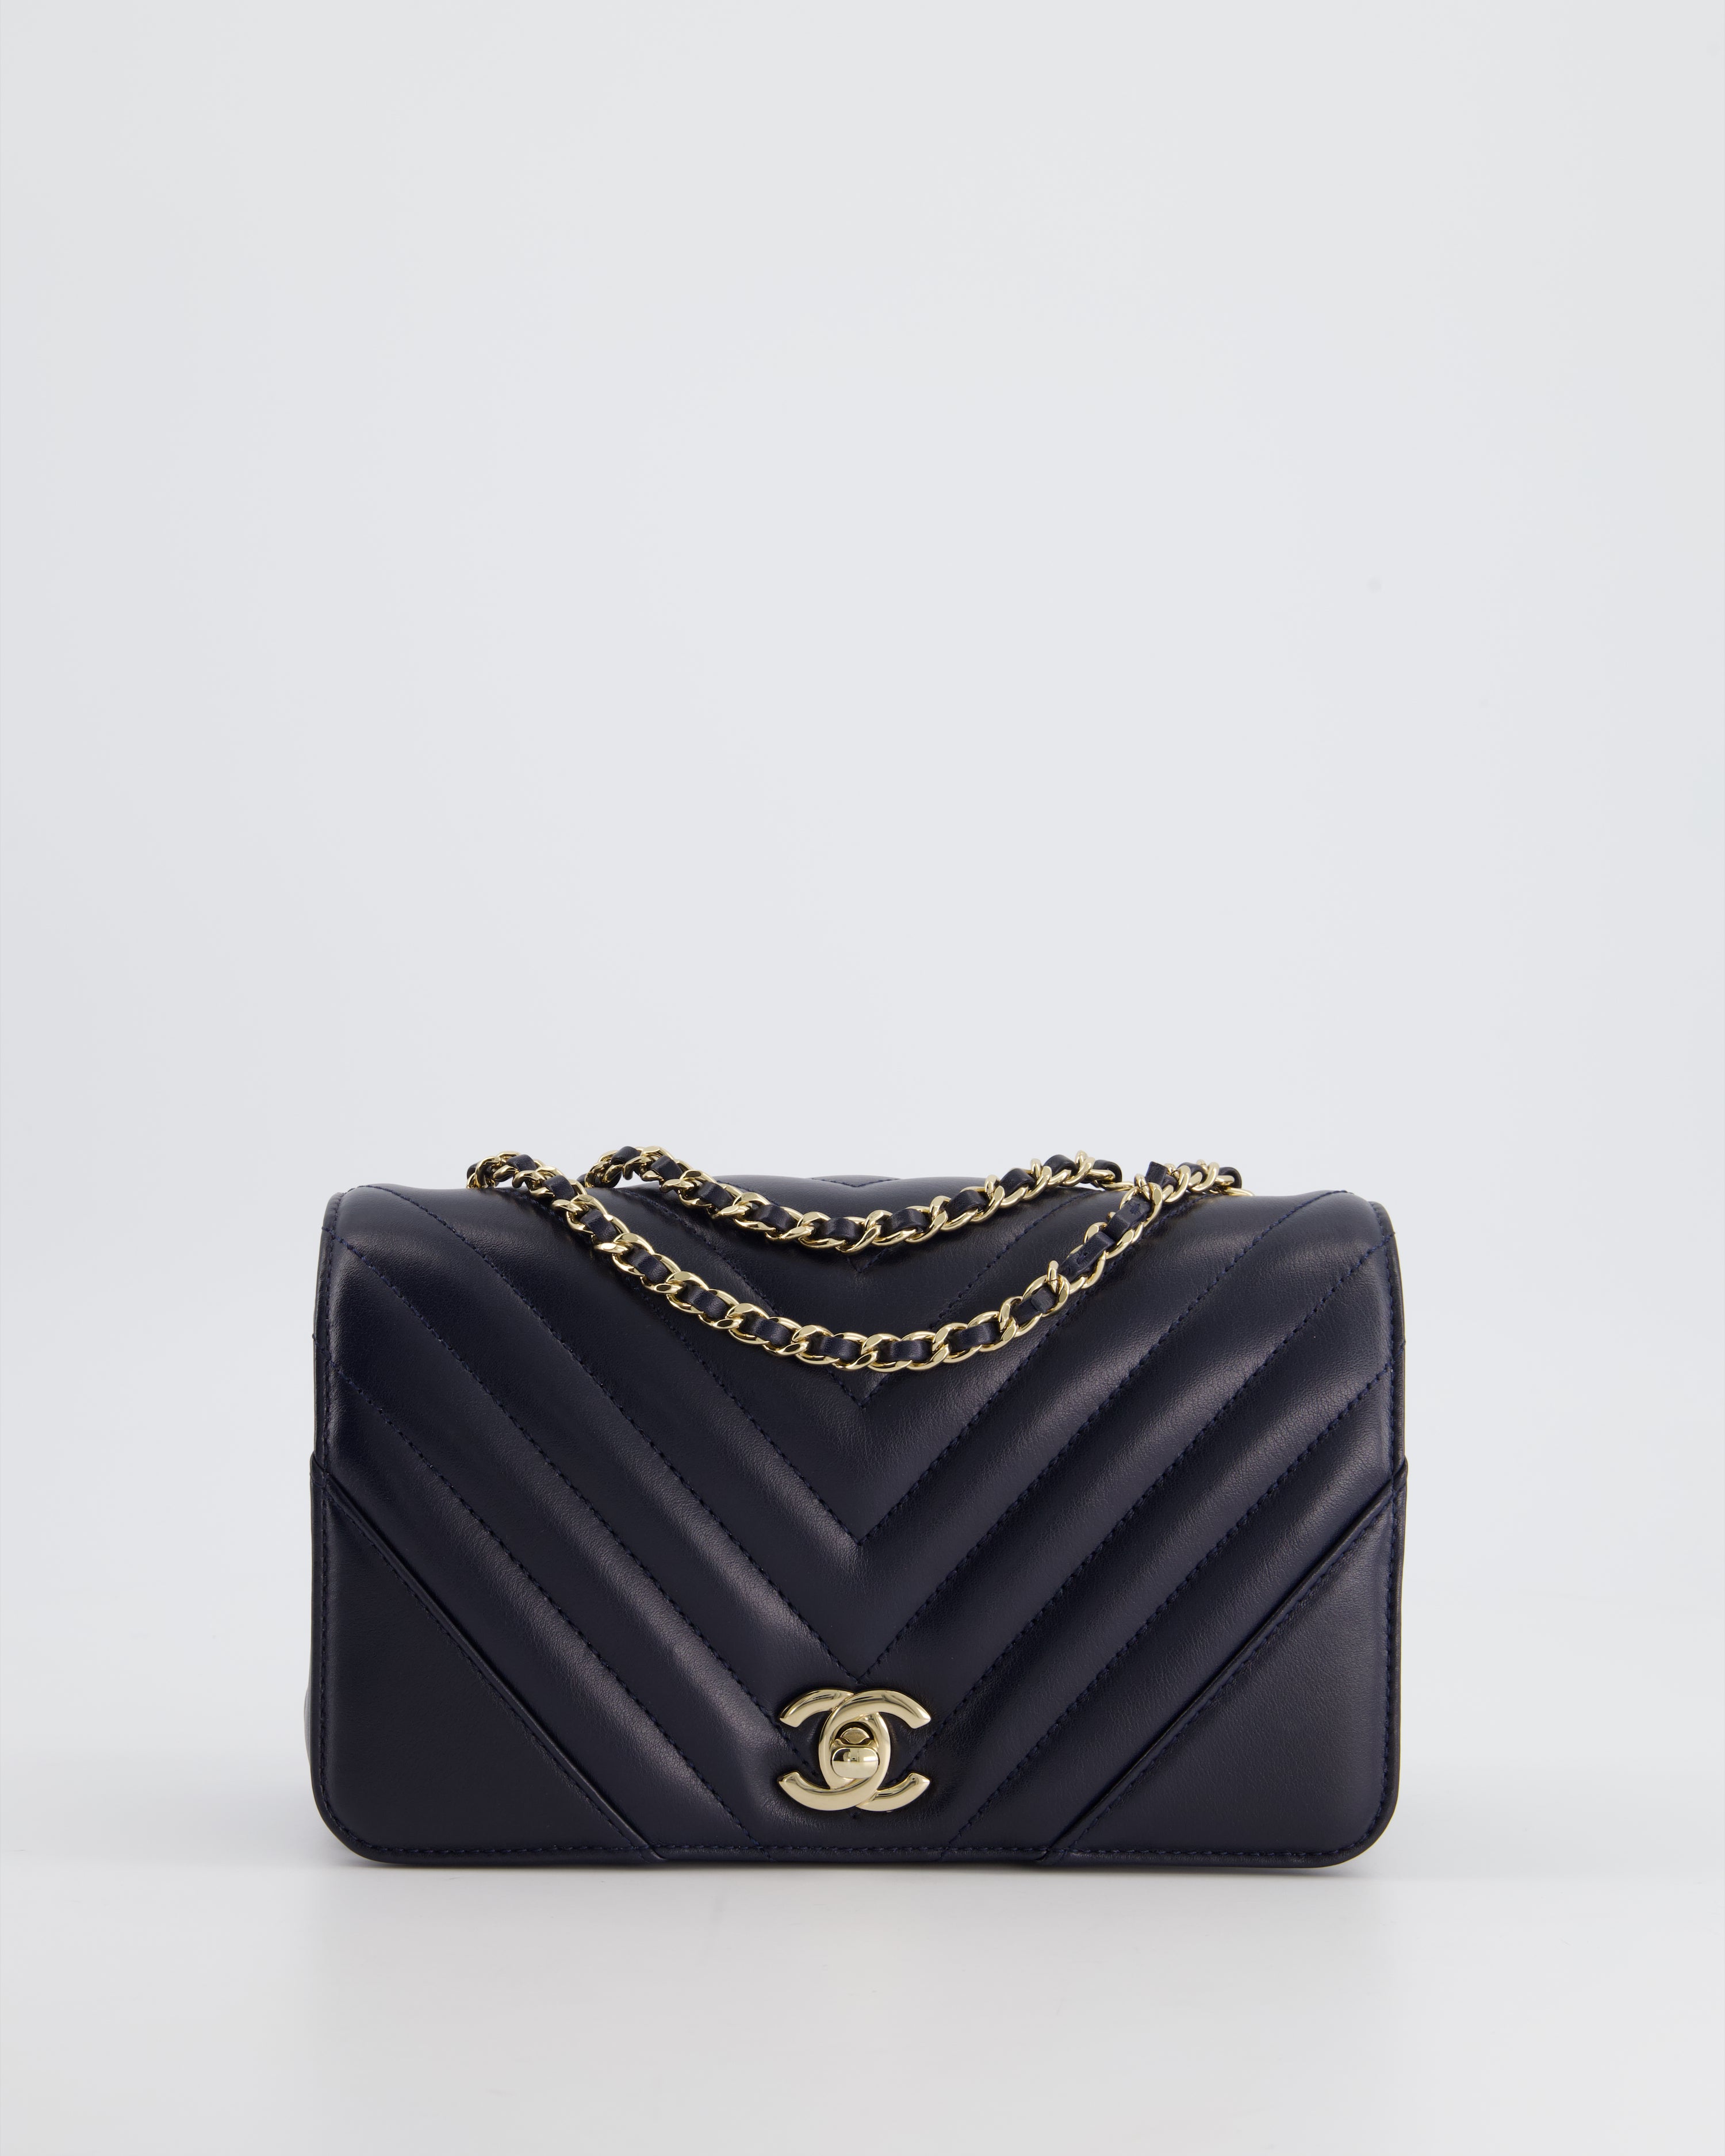 Chanel Raffia Vanity 21P Beige and Black Cross-Body Bag with Champagne Gold  Hardware Chanel